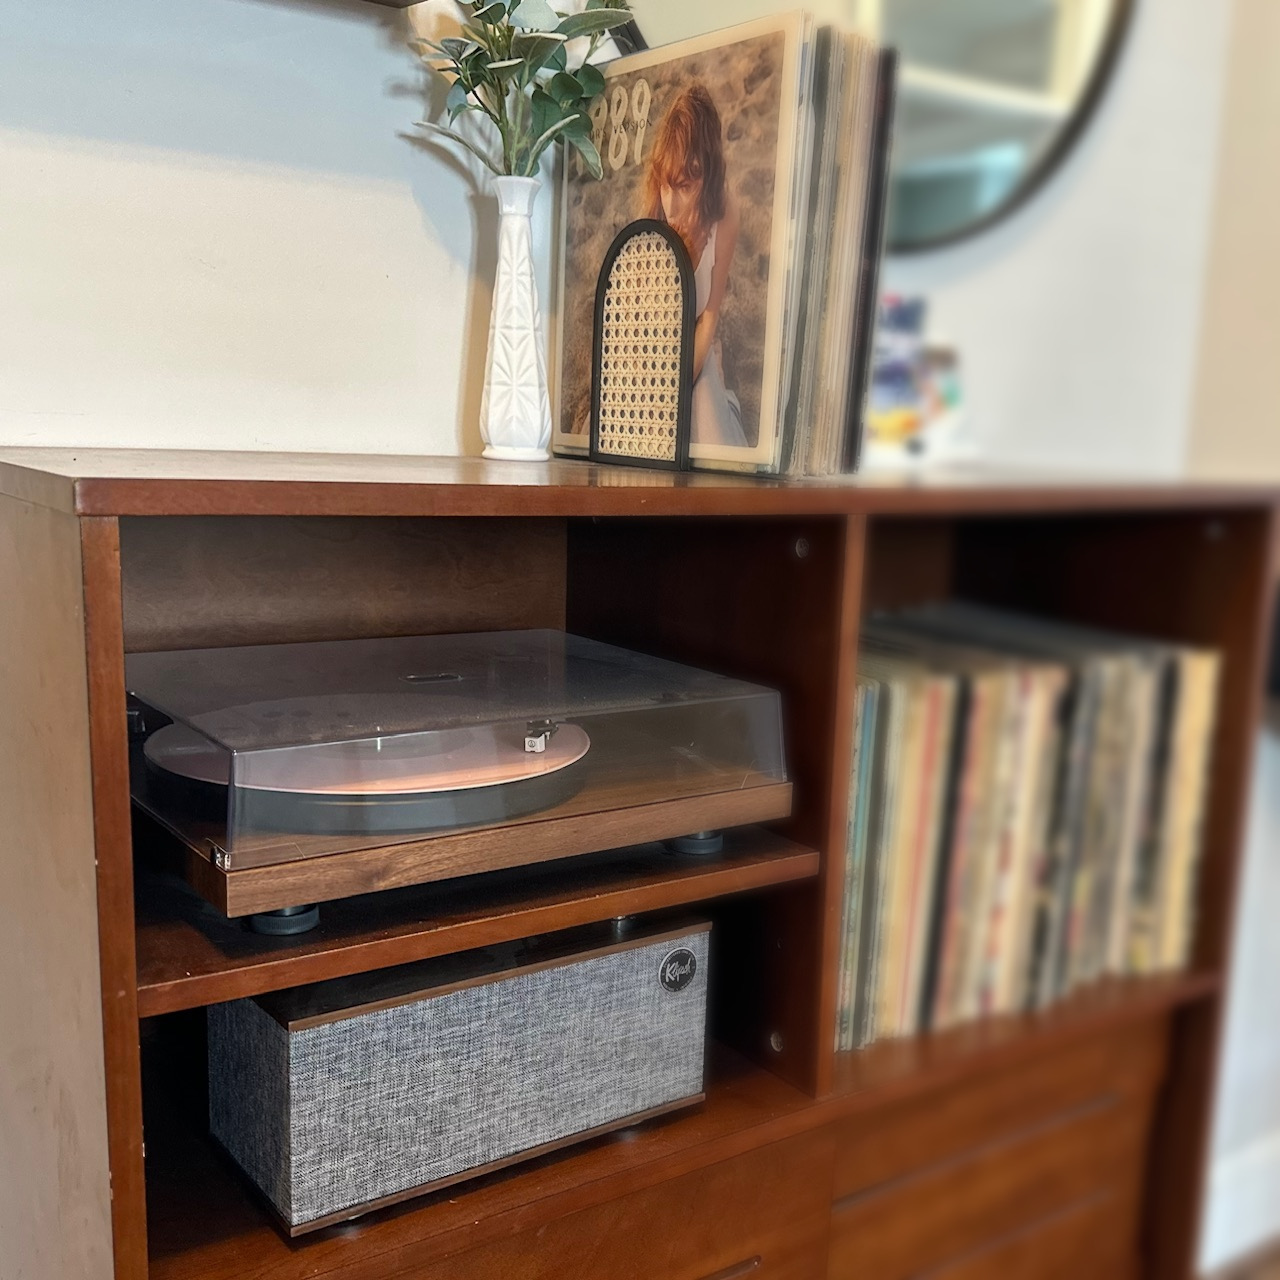 Record player, media console, record collection